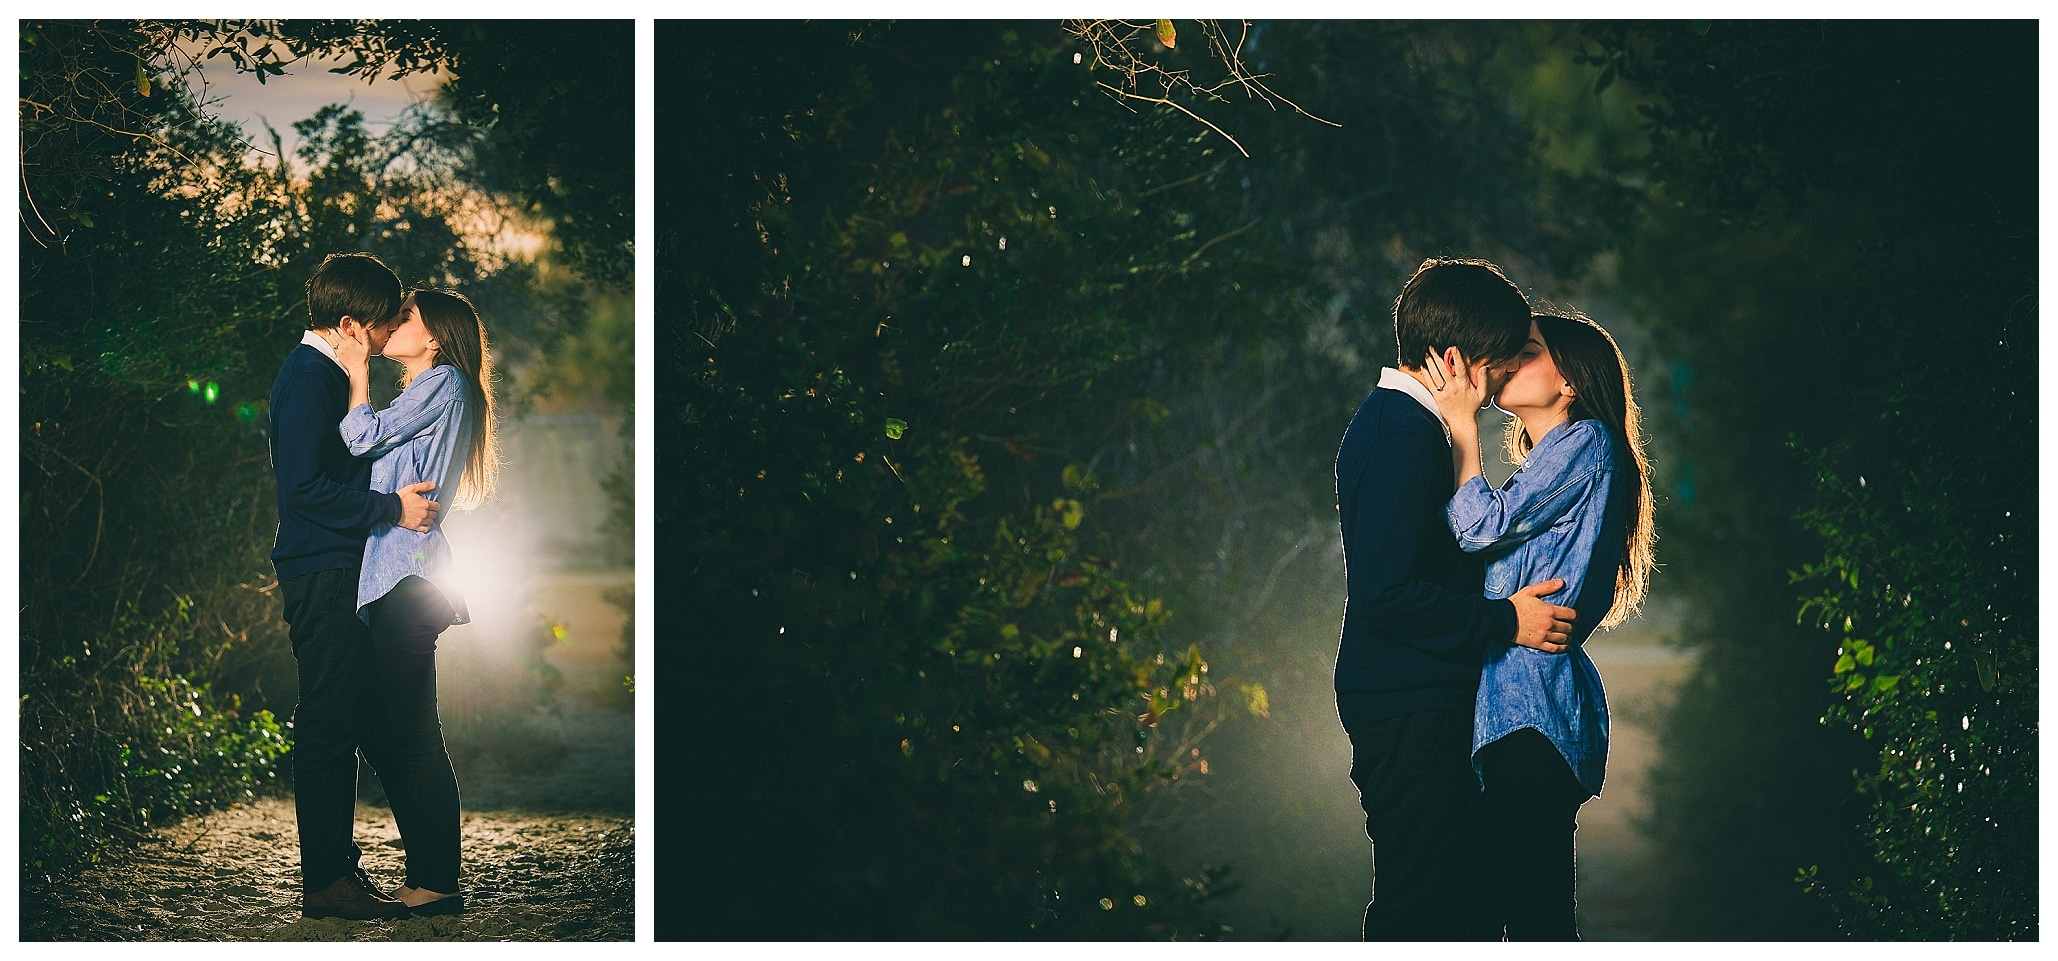 Magical lighting at the engagement photography session